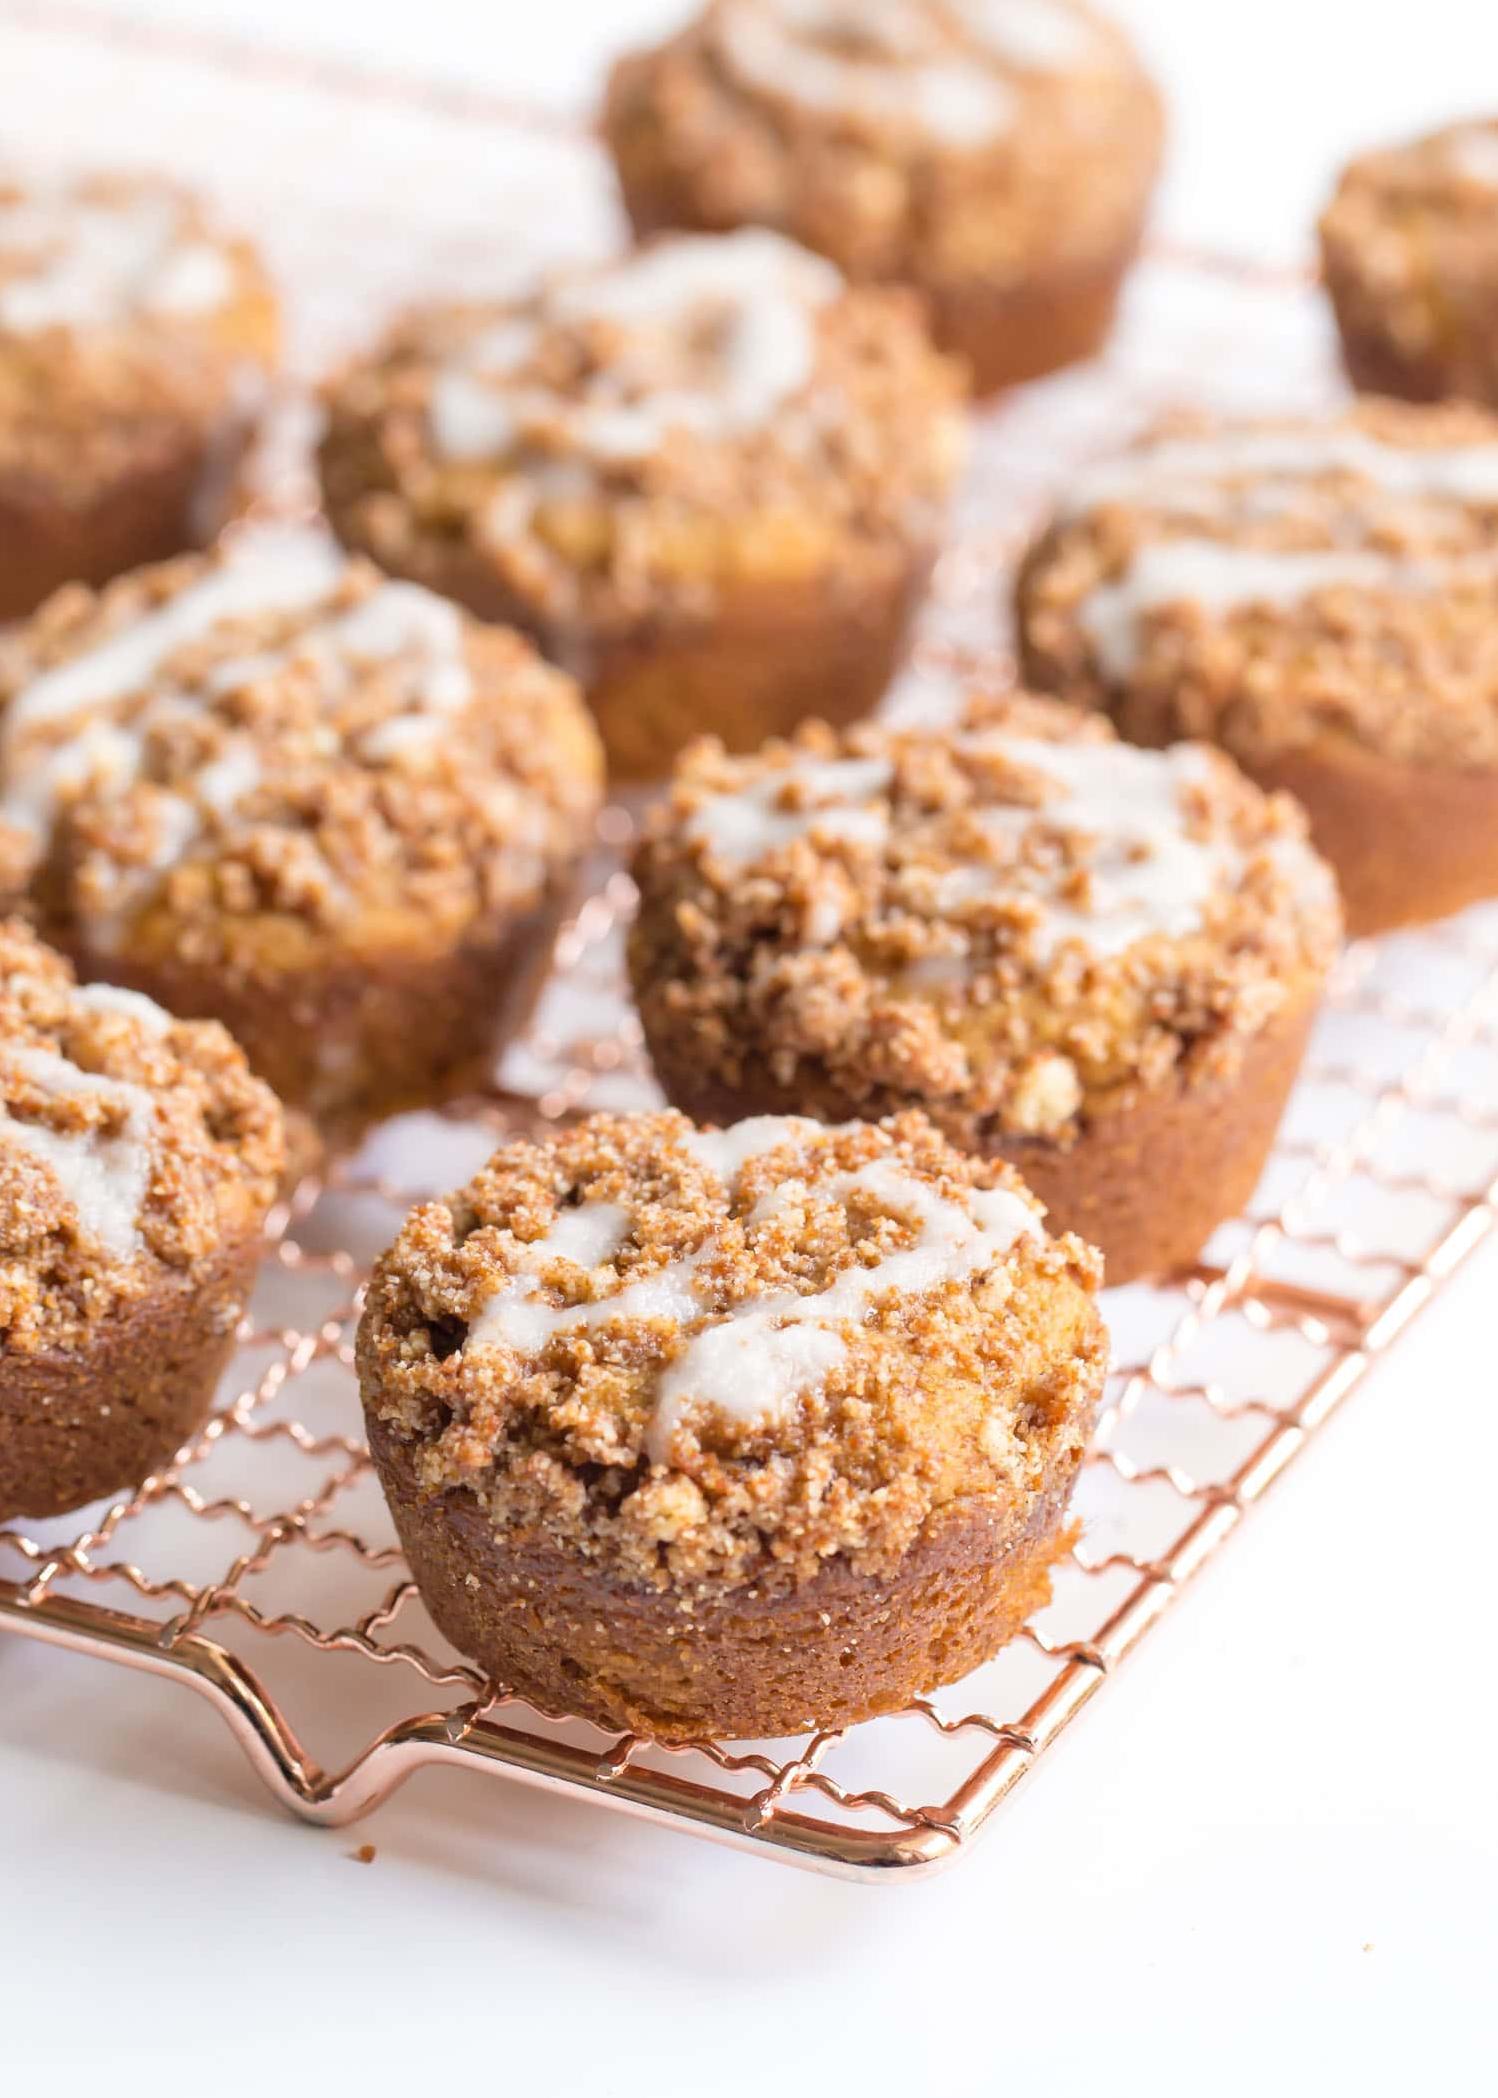  Topped with a hot cup of coffee, these muffins are the perfect start to your day.